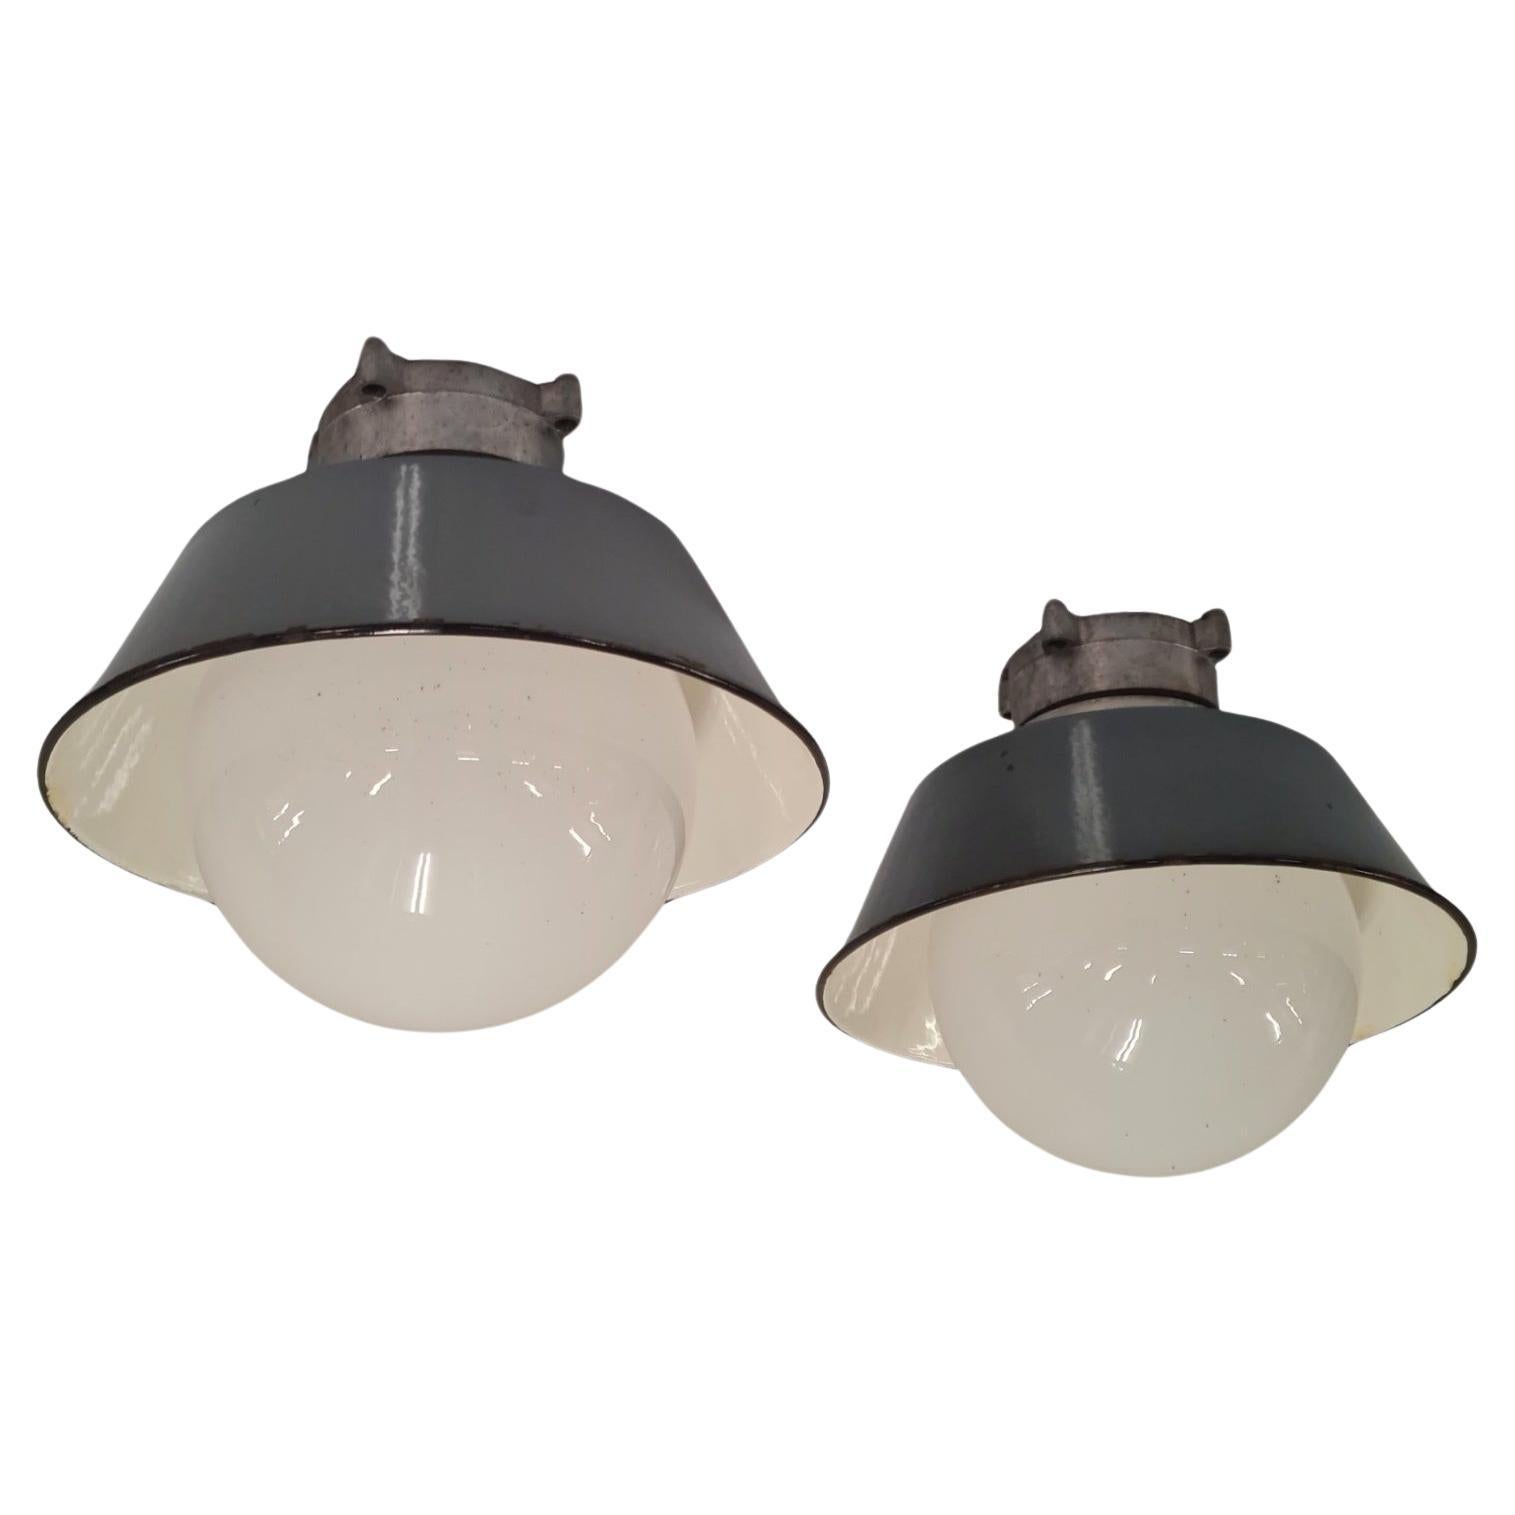 A pair of Small Paavo Tynell Outdoor / Indoor Industrial style lamps, Idman